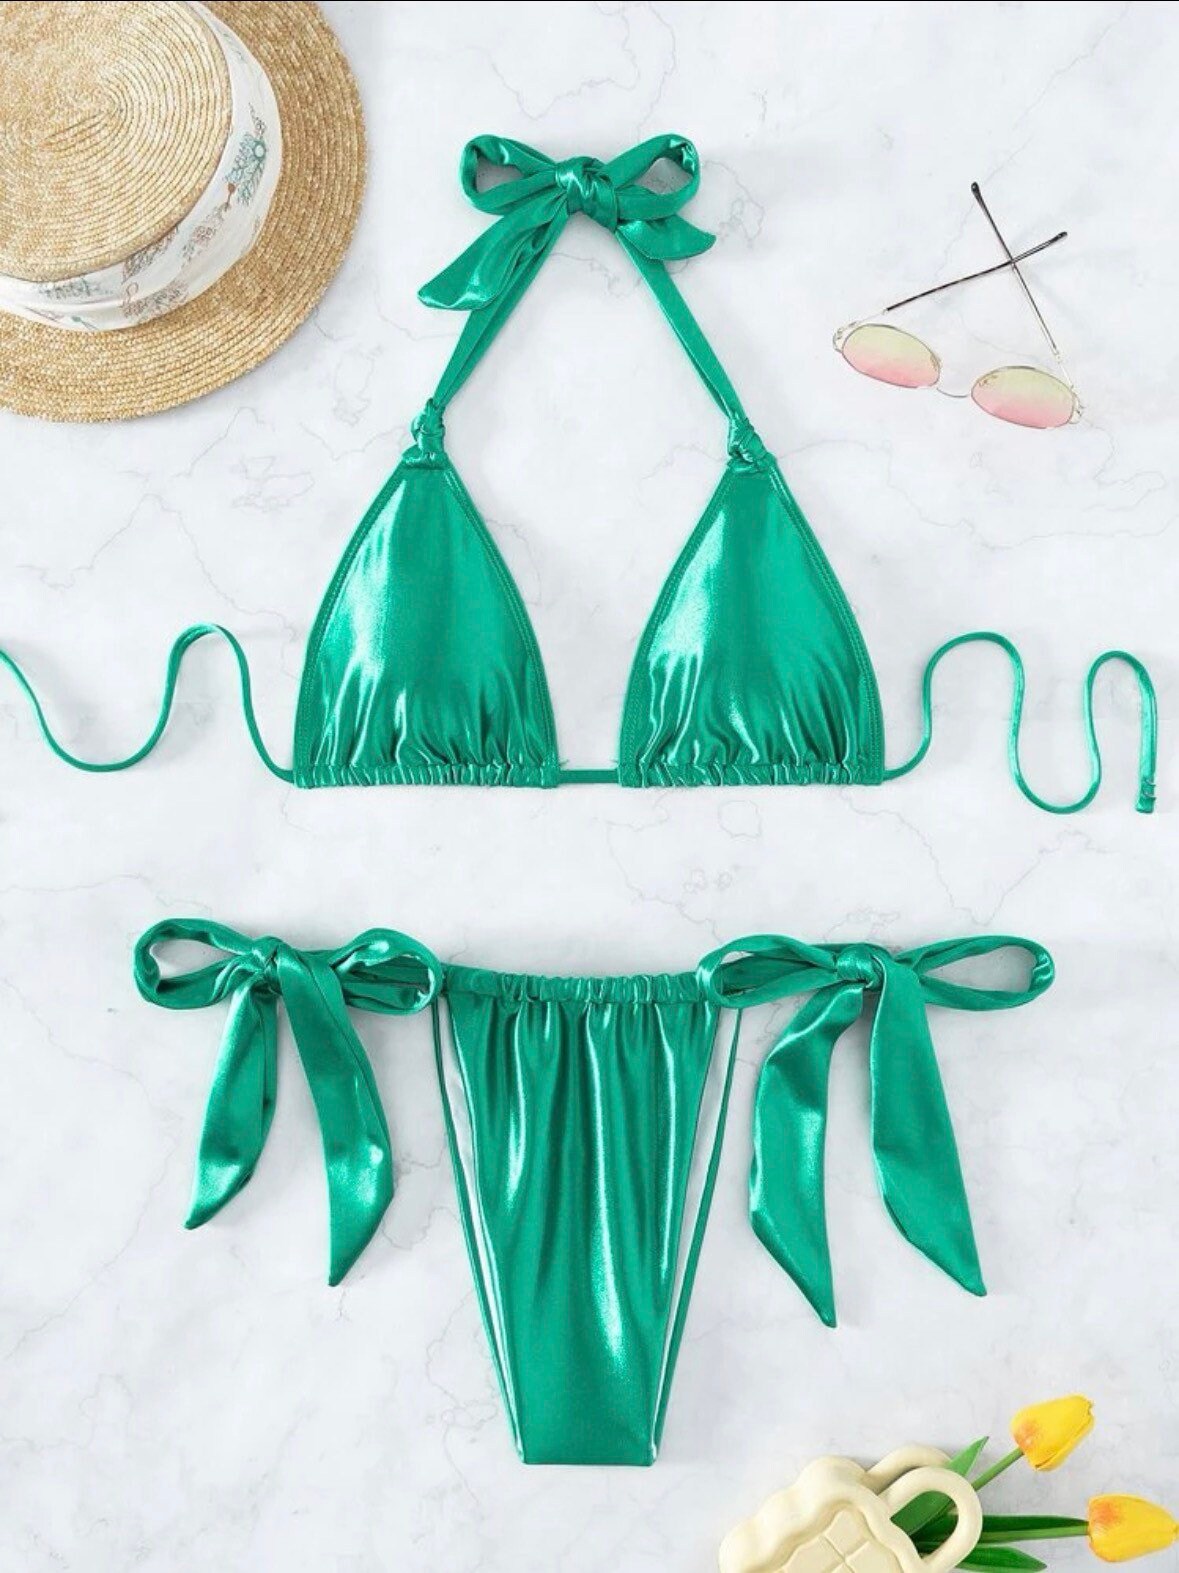 The Banging Baby Metallic Shimmer Satin Swimsuit Bikini Set with tie top and thong bottoms sexy high shine swim halter ties and triangle